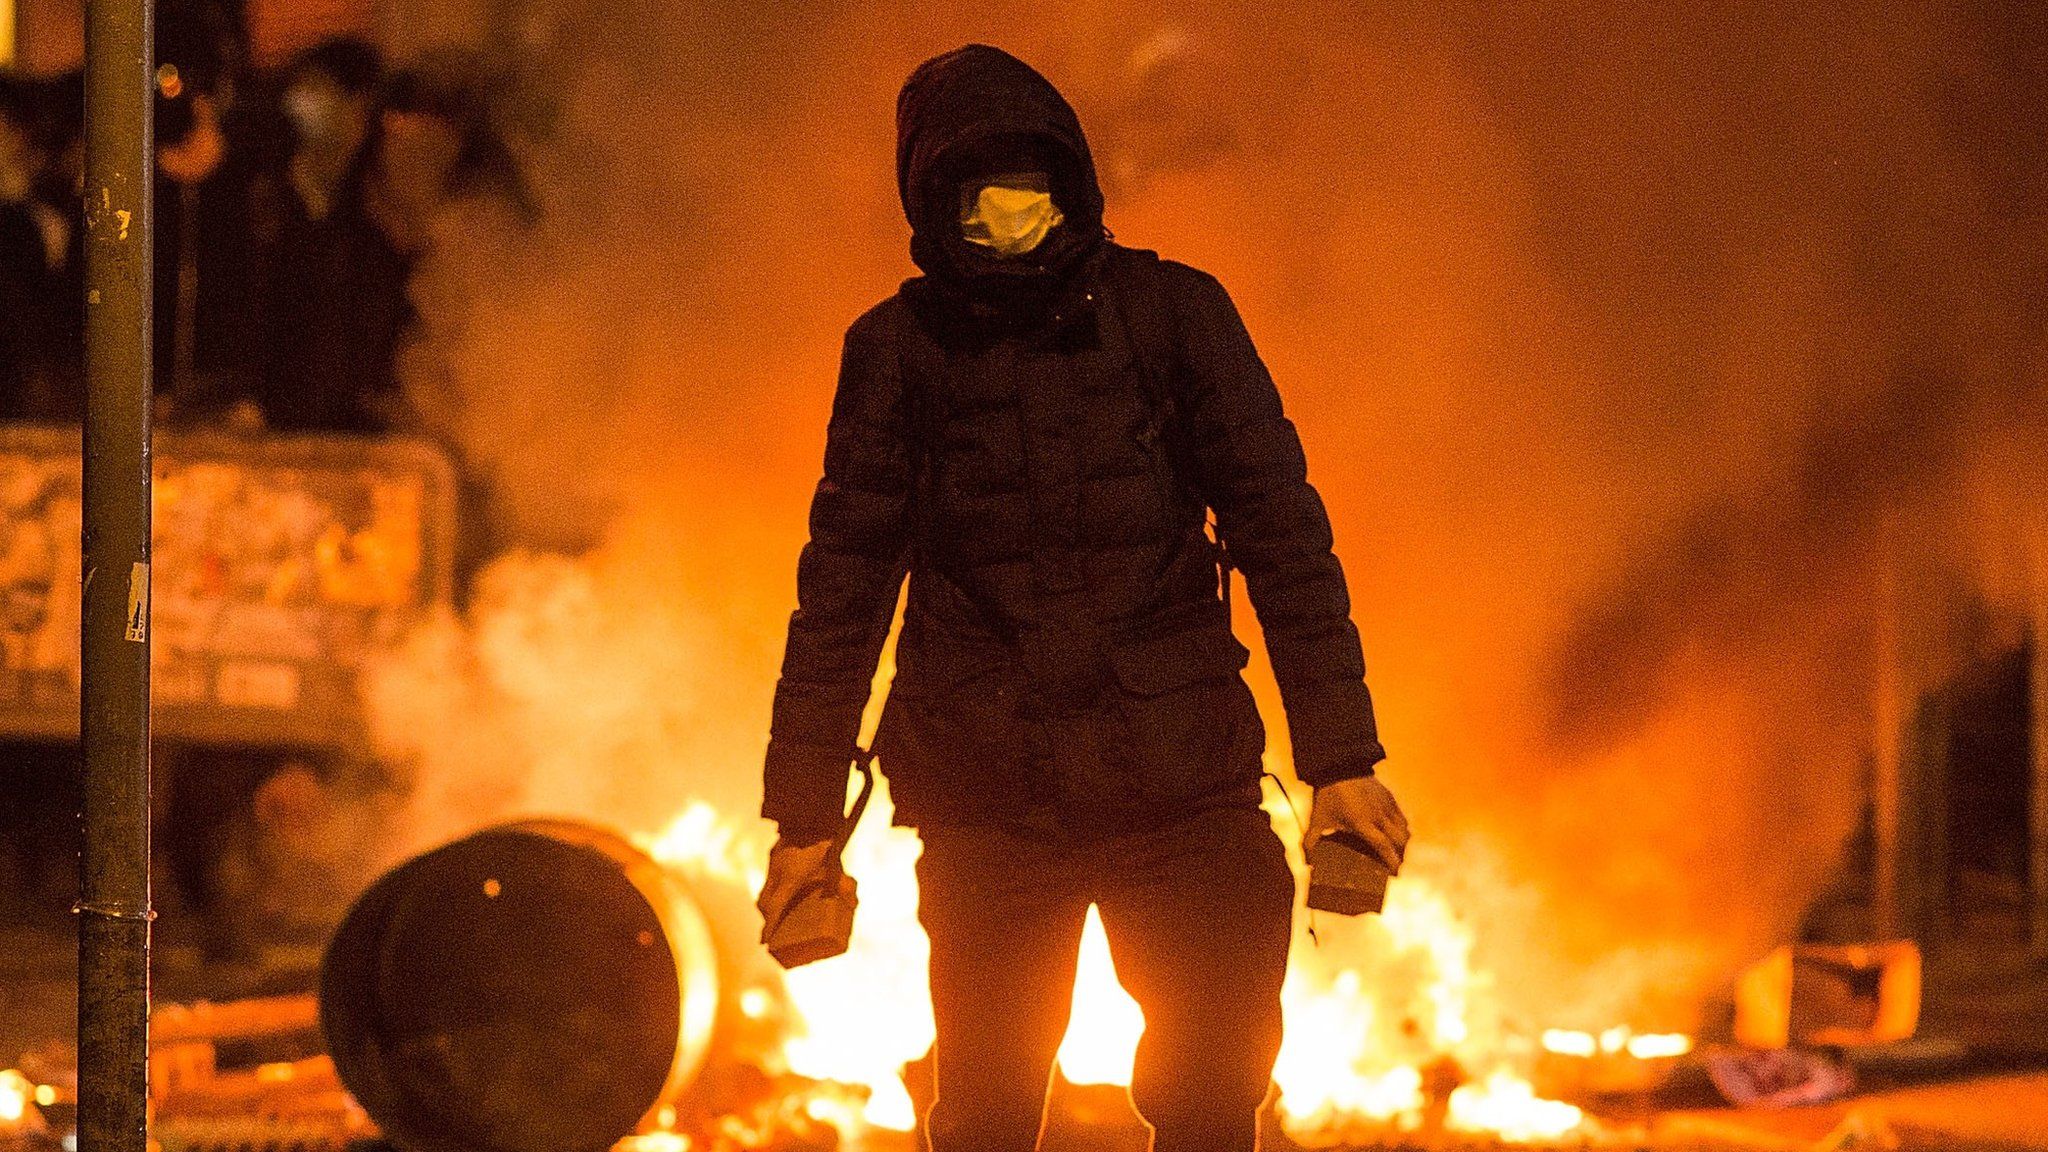 A rioter carries bricks, in front of a burning barricade